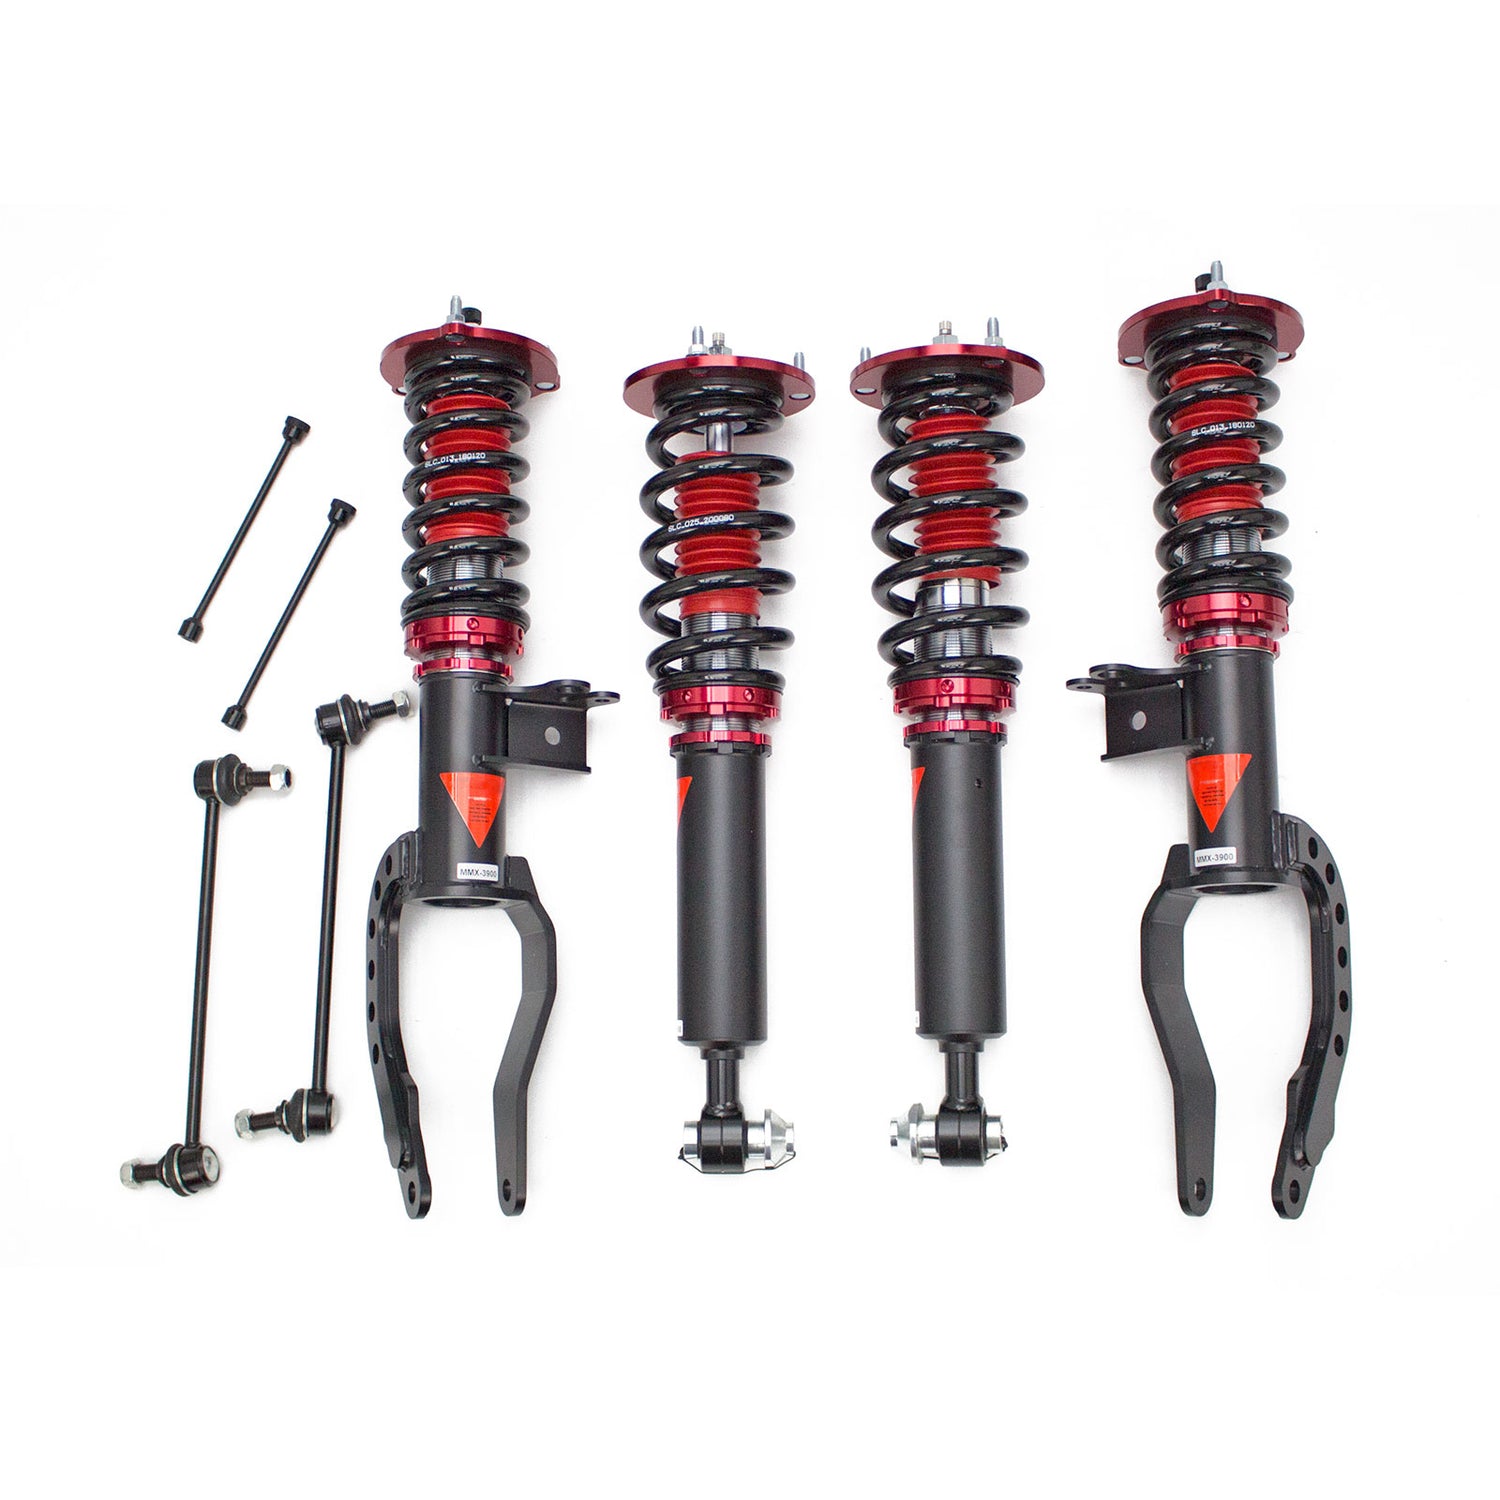 MMX3900-A MAXX Coilovers Lowering Kit, Fully Adjustable, Ride Height, 40 Clicks Rebound Settings, BMW 5-Series(F10) xDrive(AWD) 2010-16